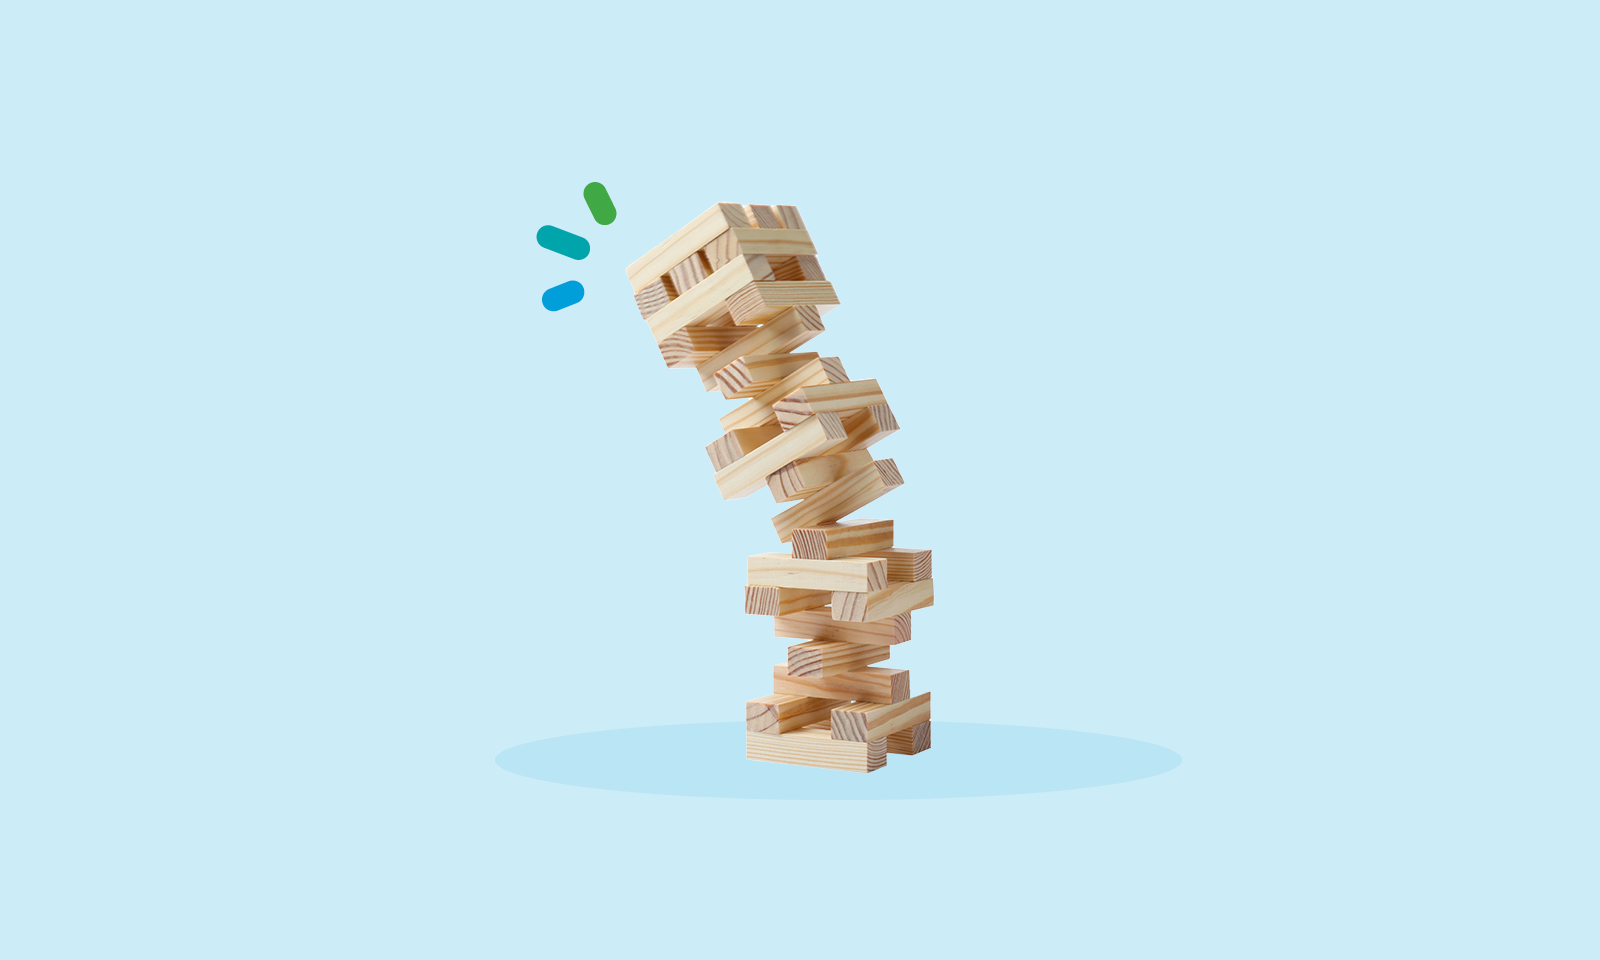 A tower of jenga blocks ready to fall over